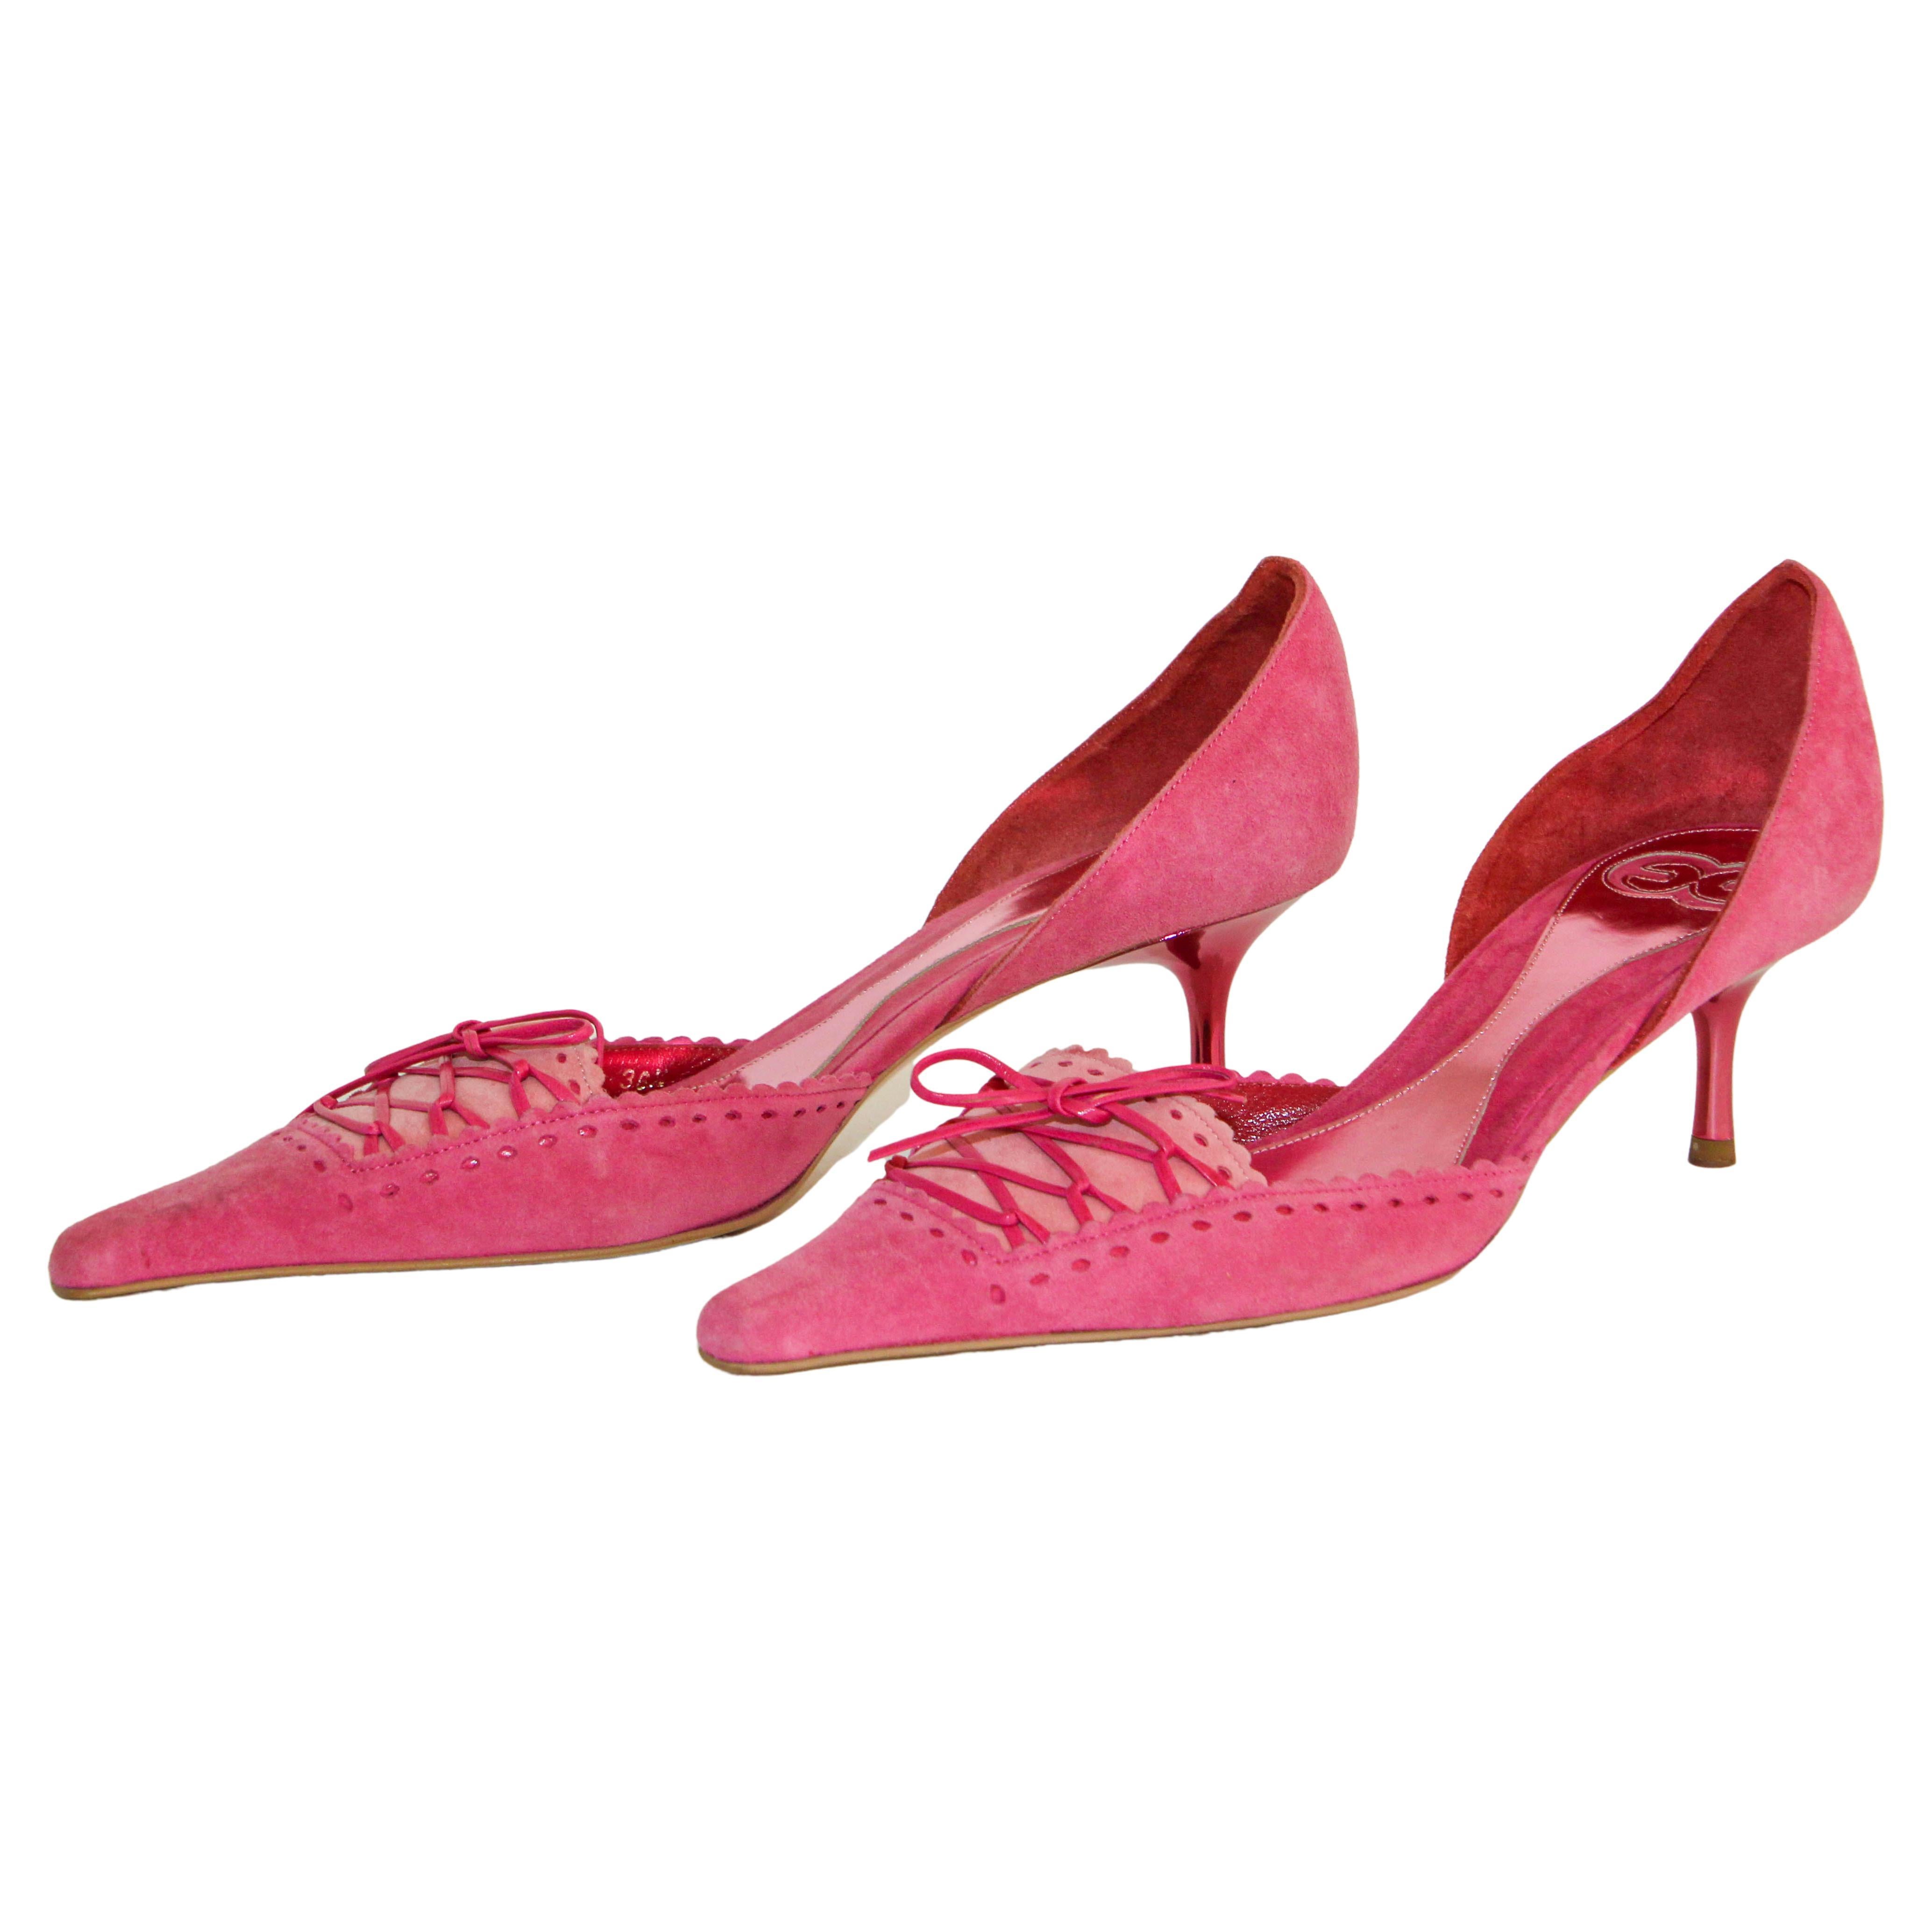 Escada Hot Pink Suede Pumps with Leather Details Size 36.5 Italy